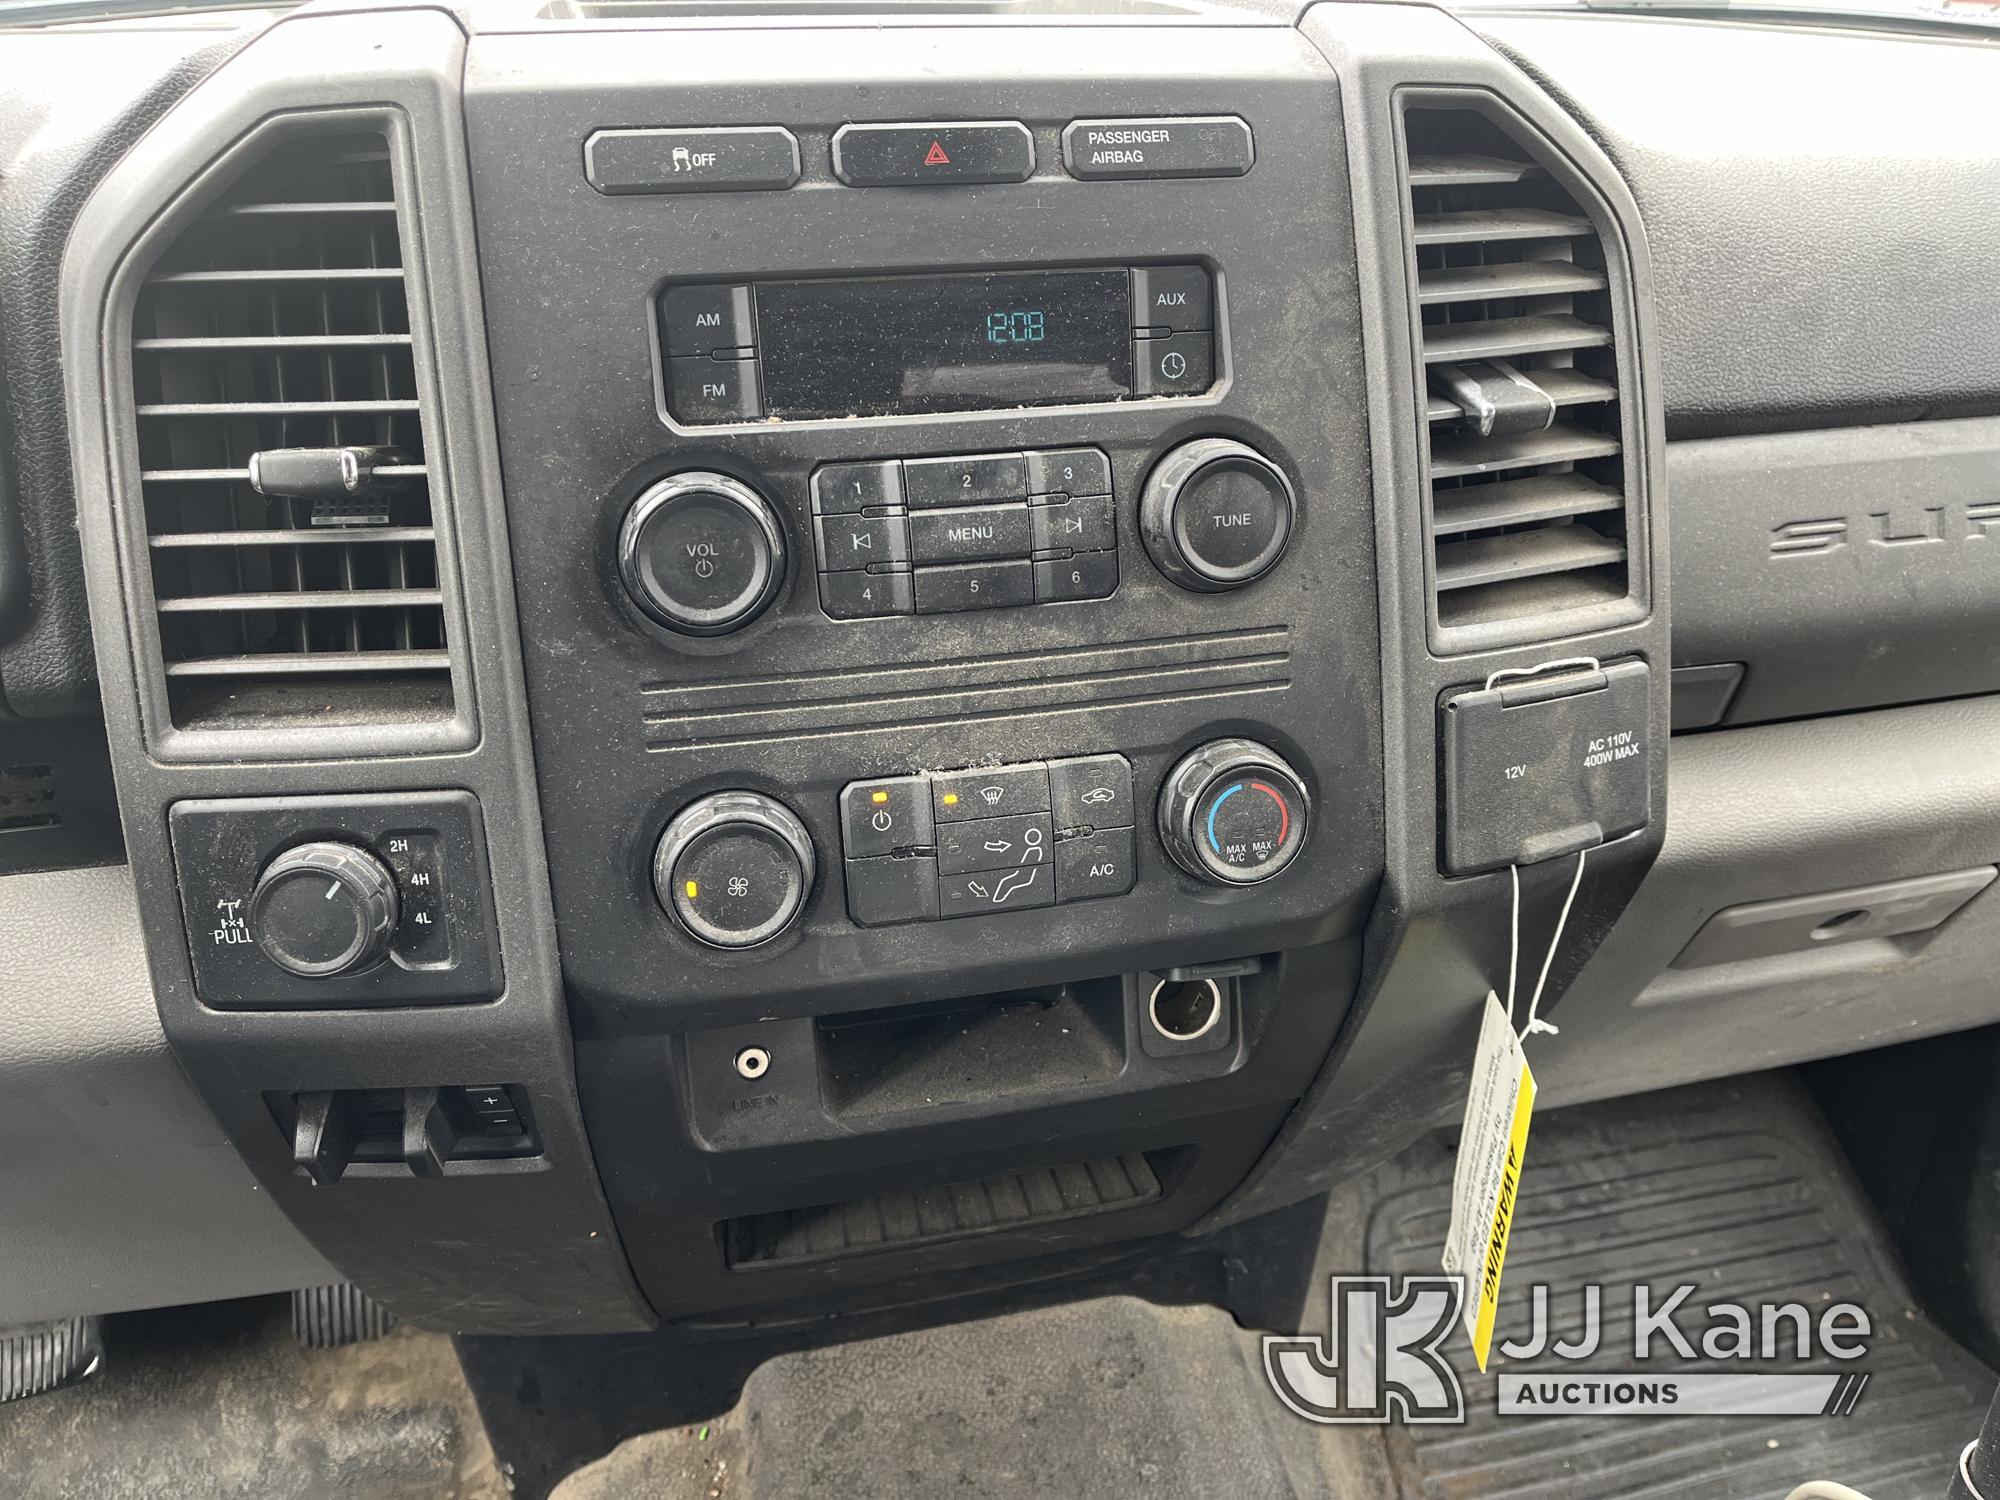 (Smock, PA) 2017 Ford F250 4x4 Extended-Cab Enclosed Service Truck Runs & Moves, Passenger Side Mirr